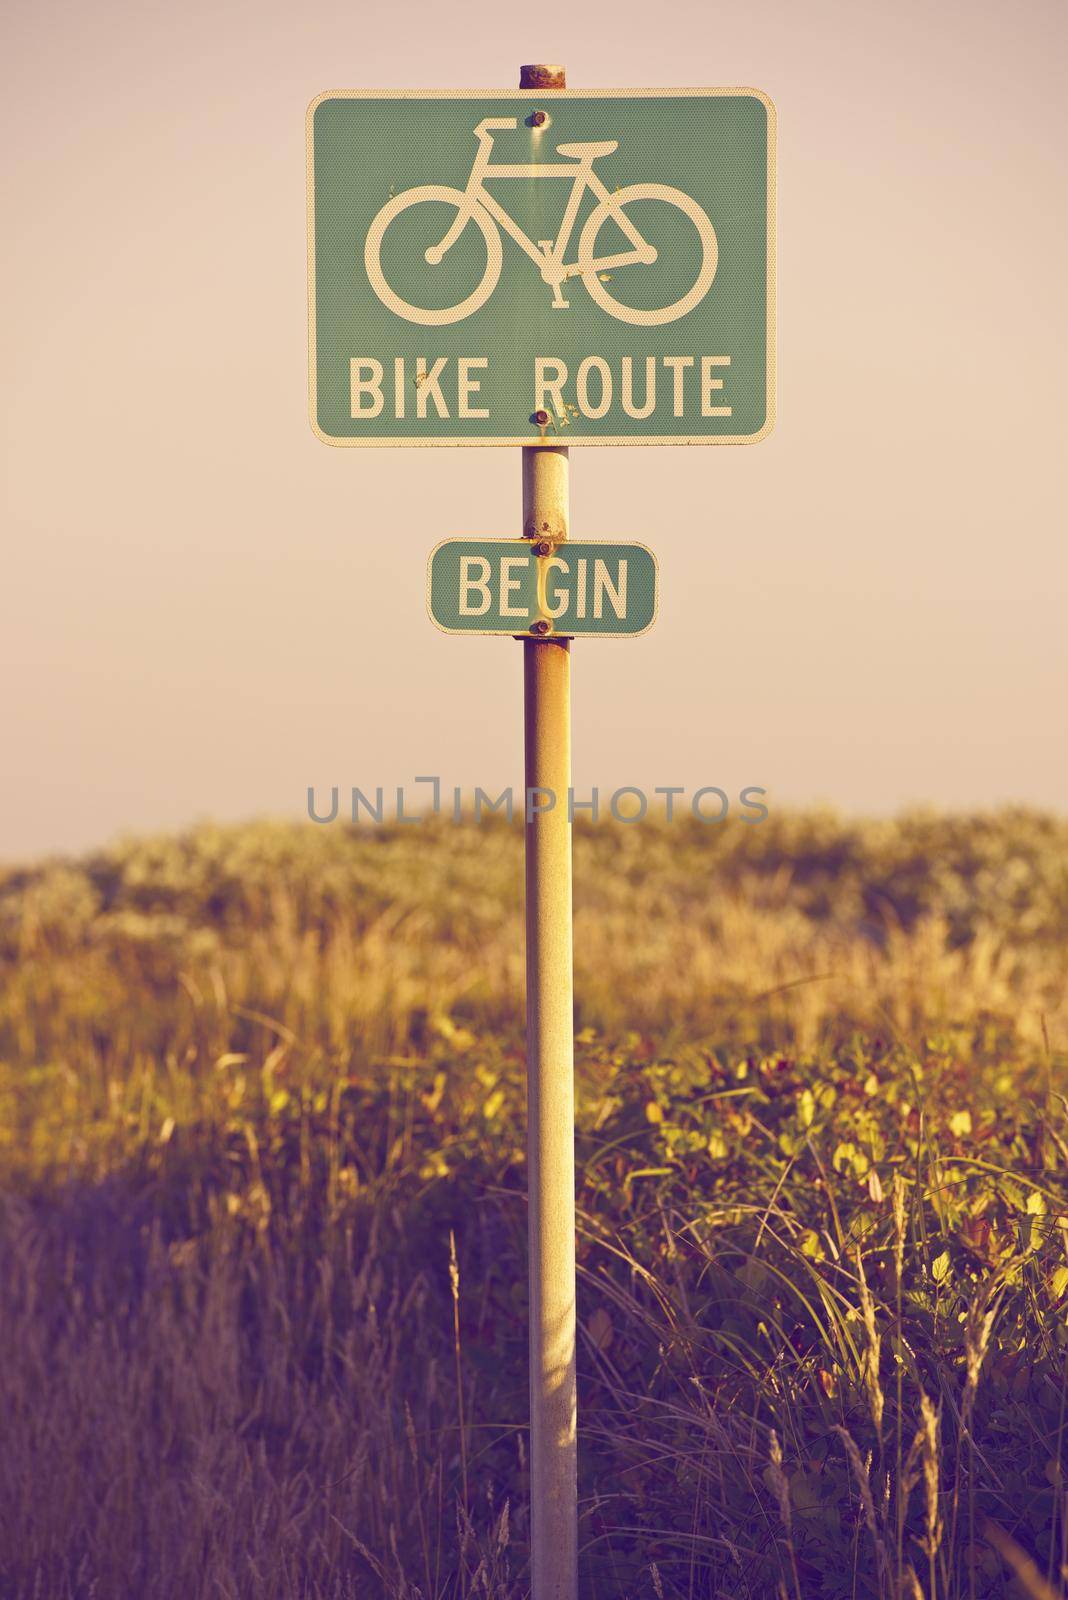 Bike Route Begin Traffic Sign in California, USA. Signage Photo Collection. by welcomia